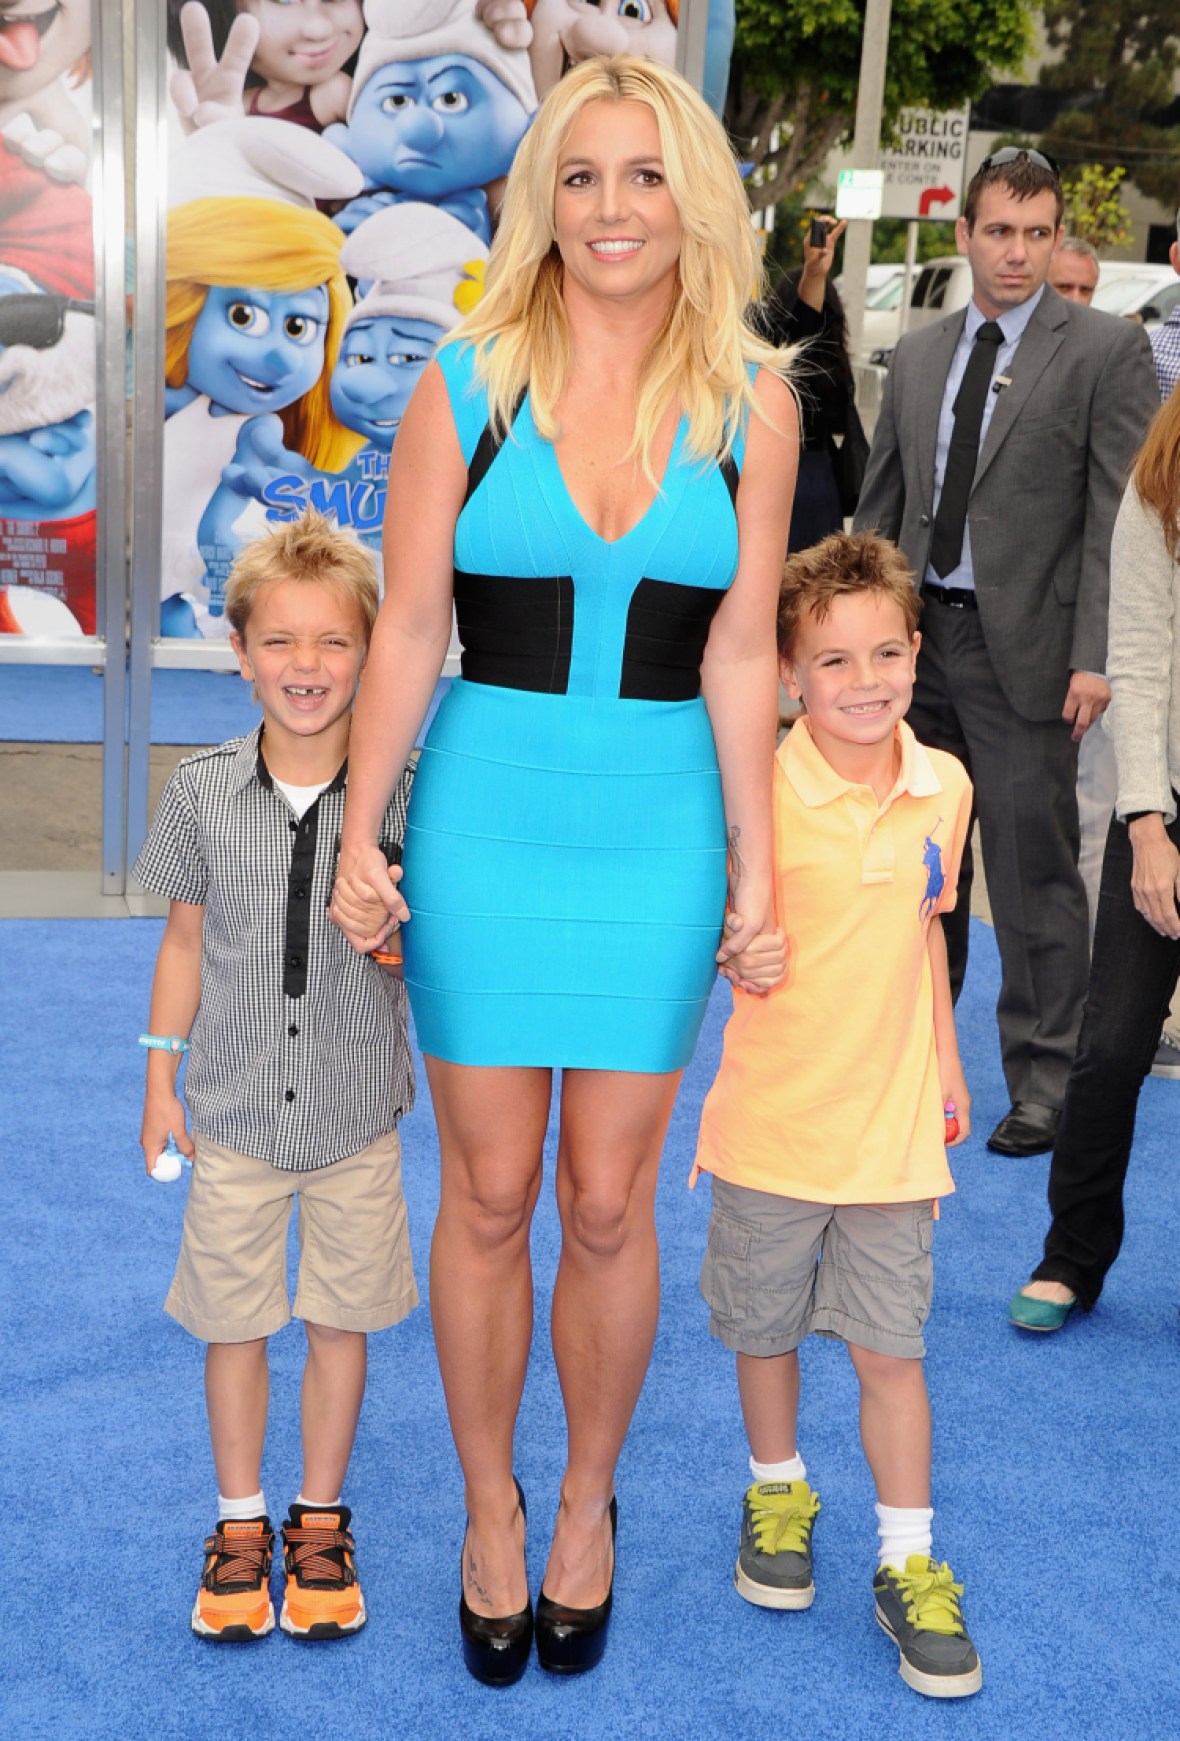 How Old Are Britney Spears' Kids? Find out More About ...